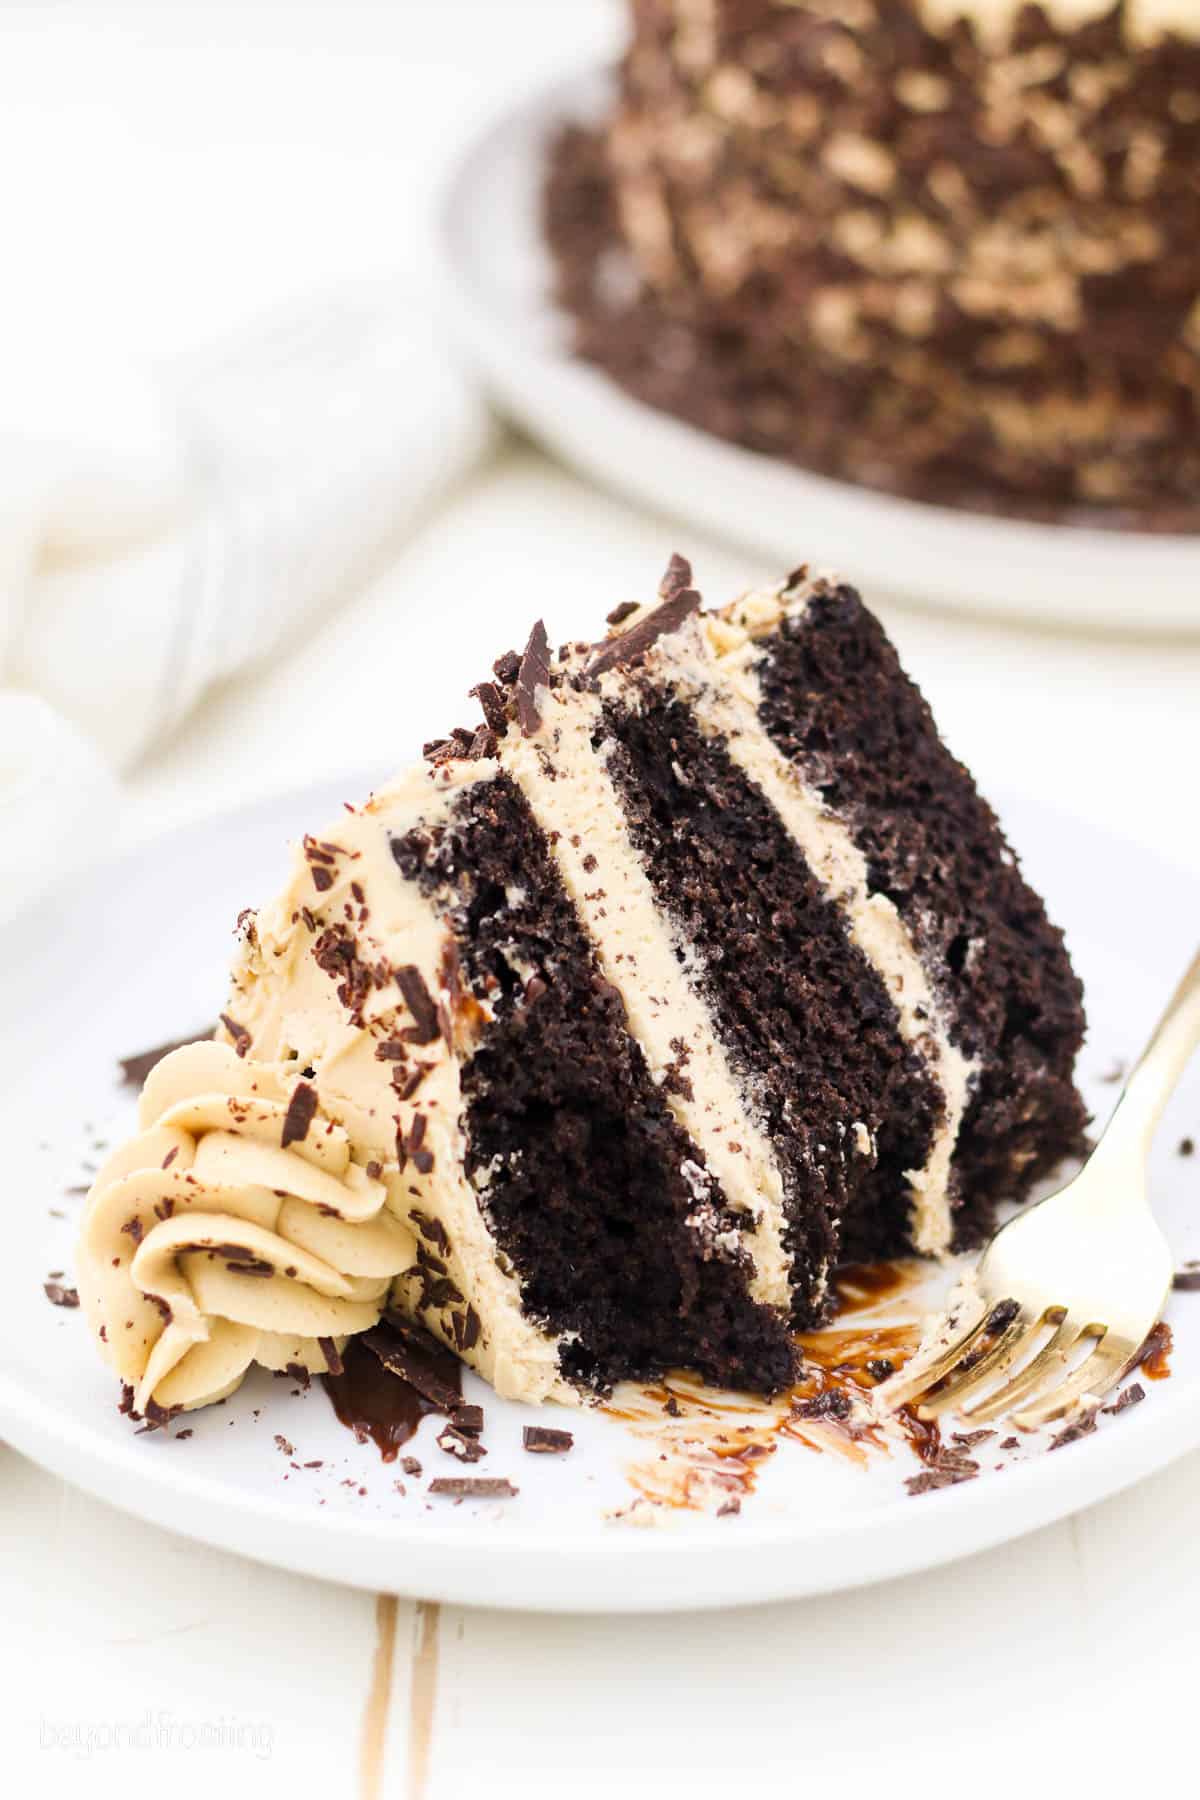 A slice of frosted 3-layer chocolate mocha cake laying on its side on a white plate, with a corner missing.